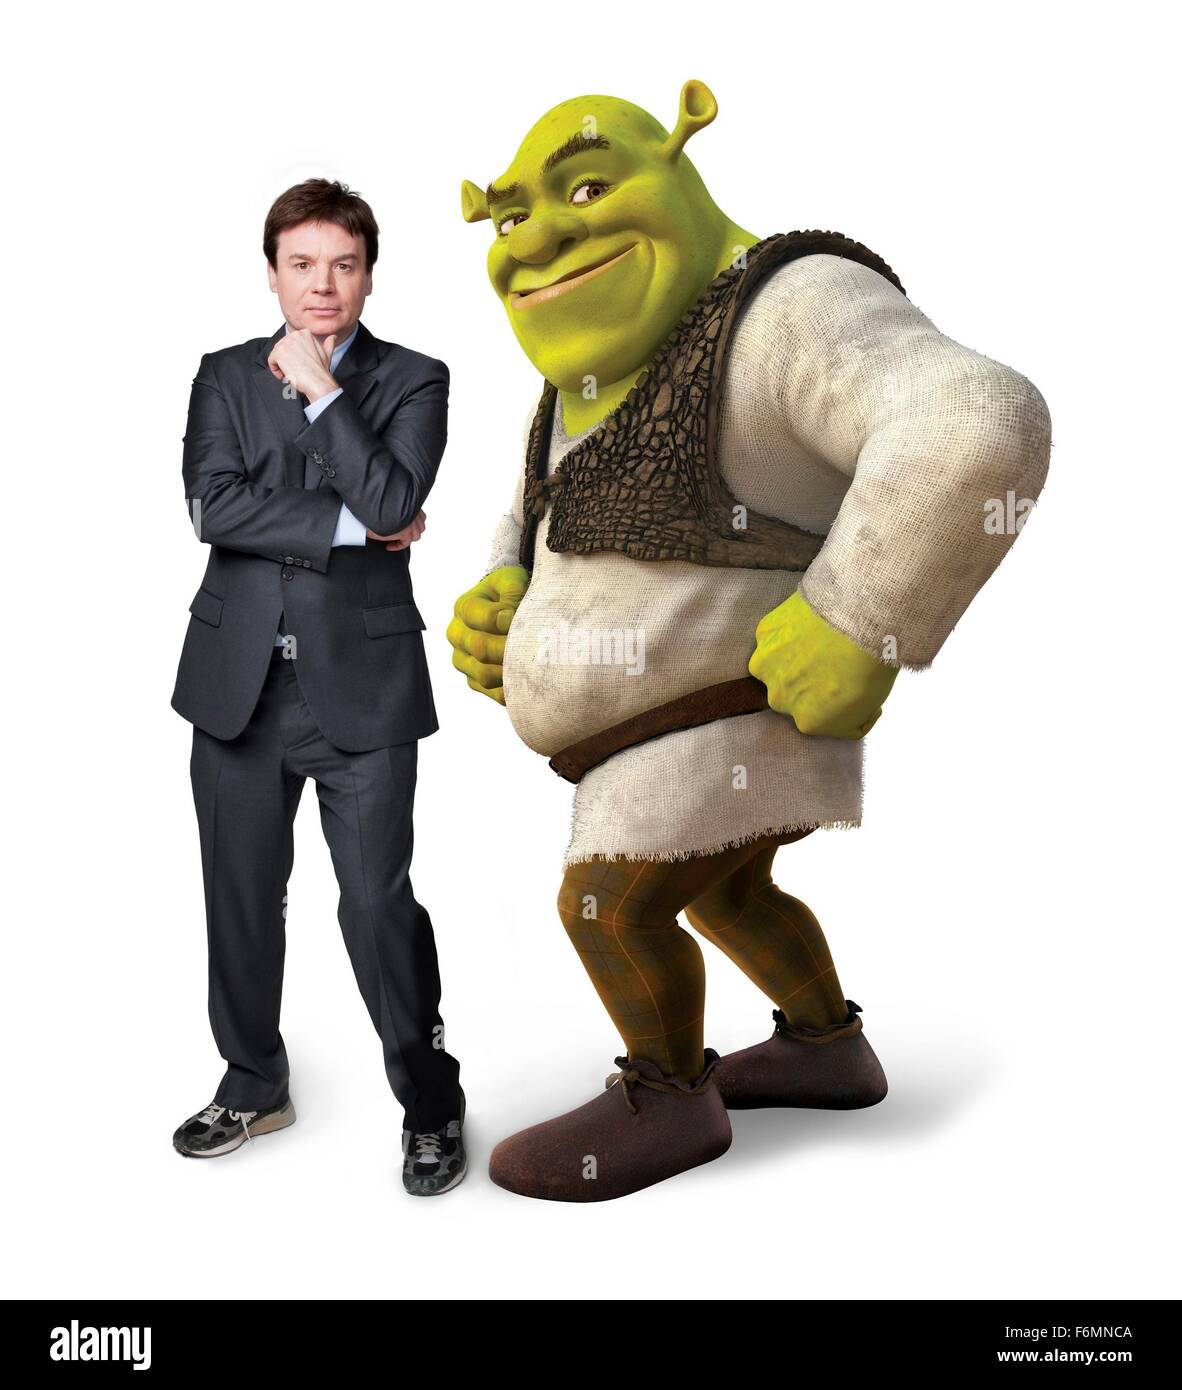 RELEASE DATE: May 21, 2010. MOVIE TITLE: Shrek Forever After. STUDIO: DreamWorks. PLOT: The further adventures of the giant green ogre, Shrek, living in the land of Far, Far Away. PICTURED: MIKE MYERS as Shrek. Stock Photo